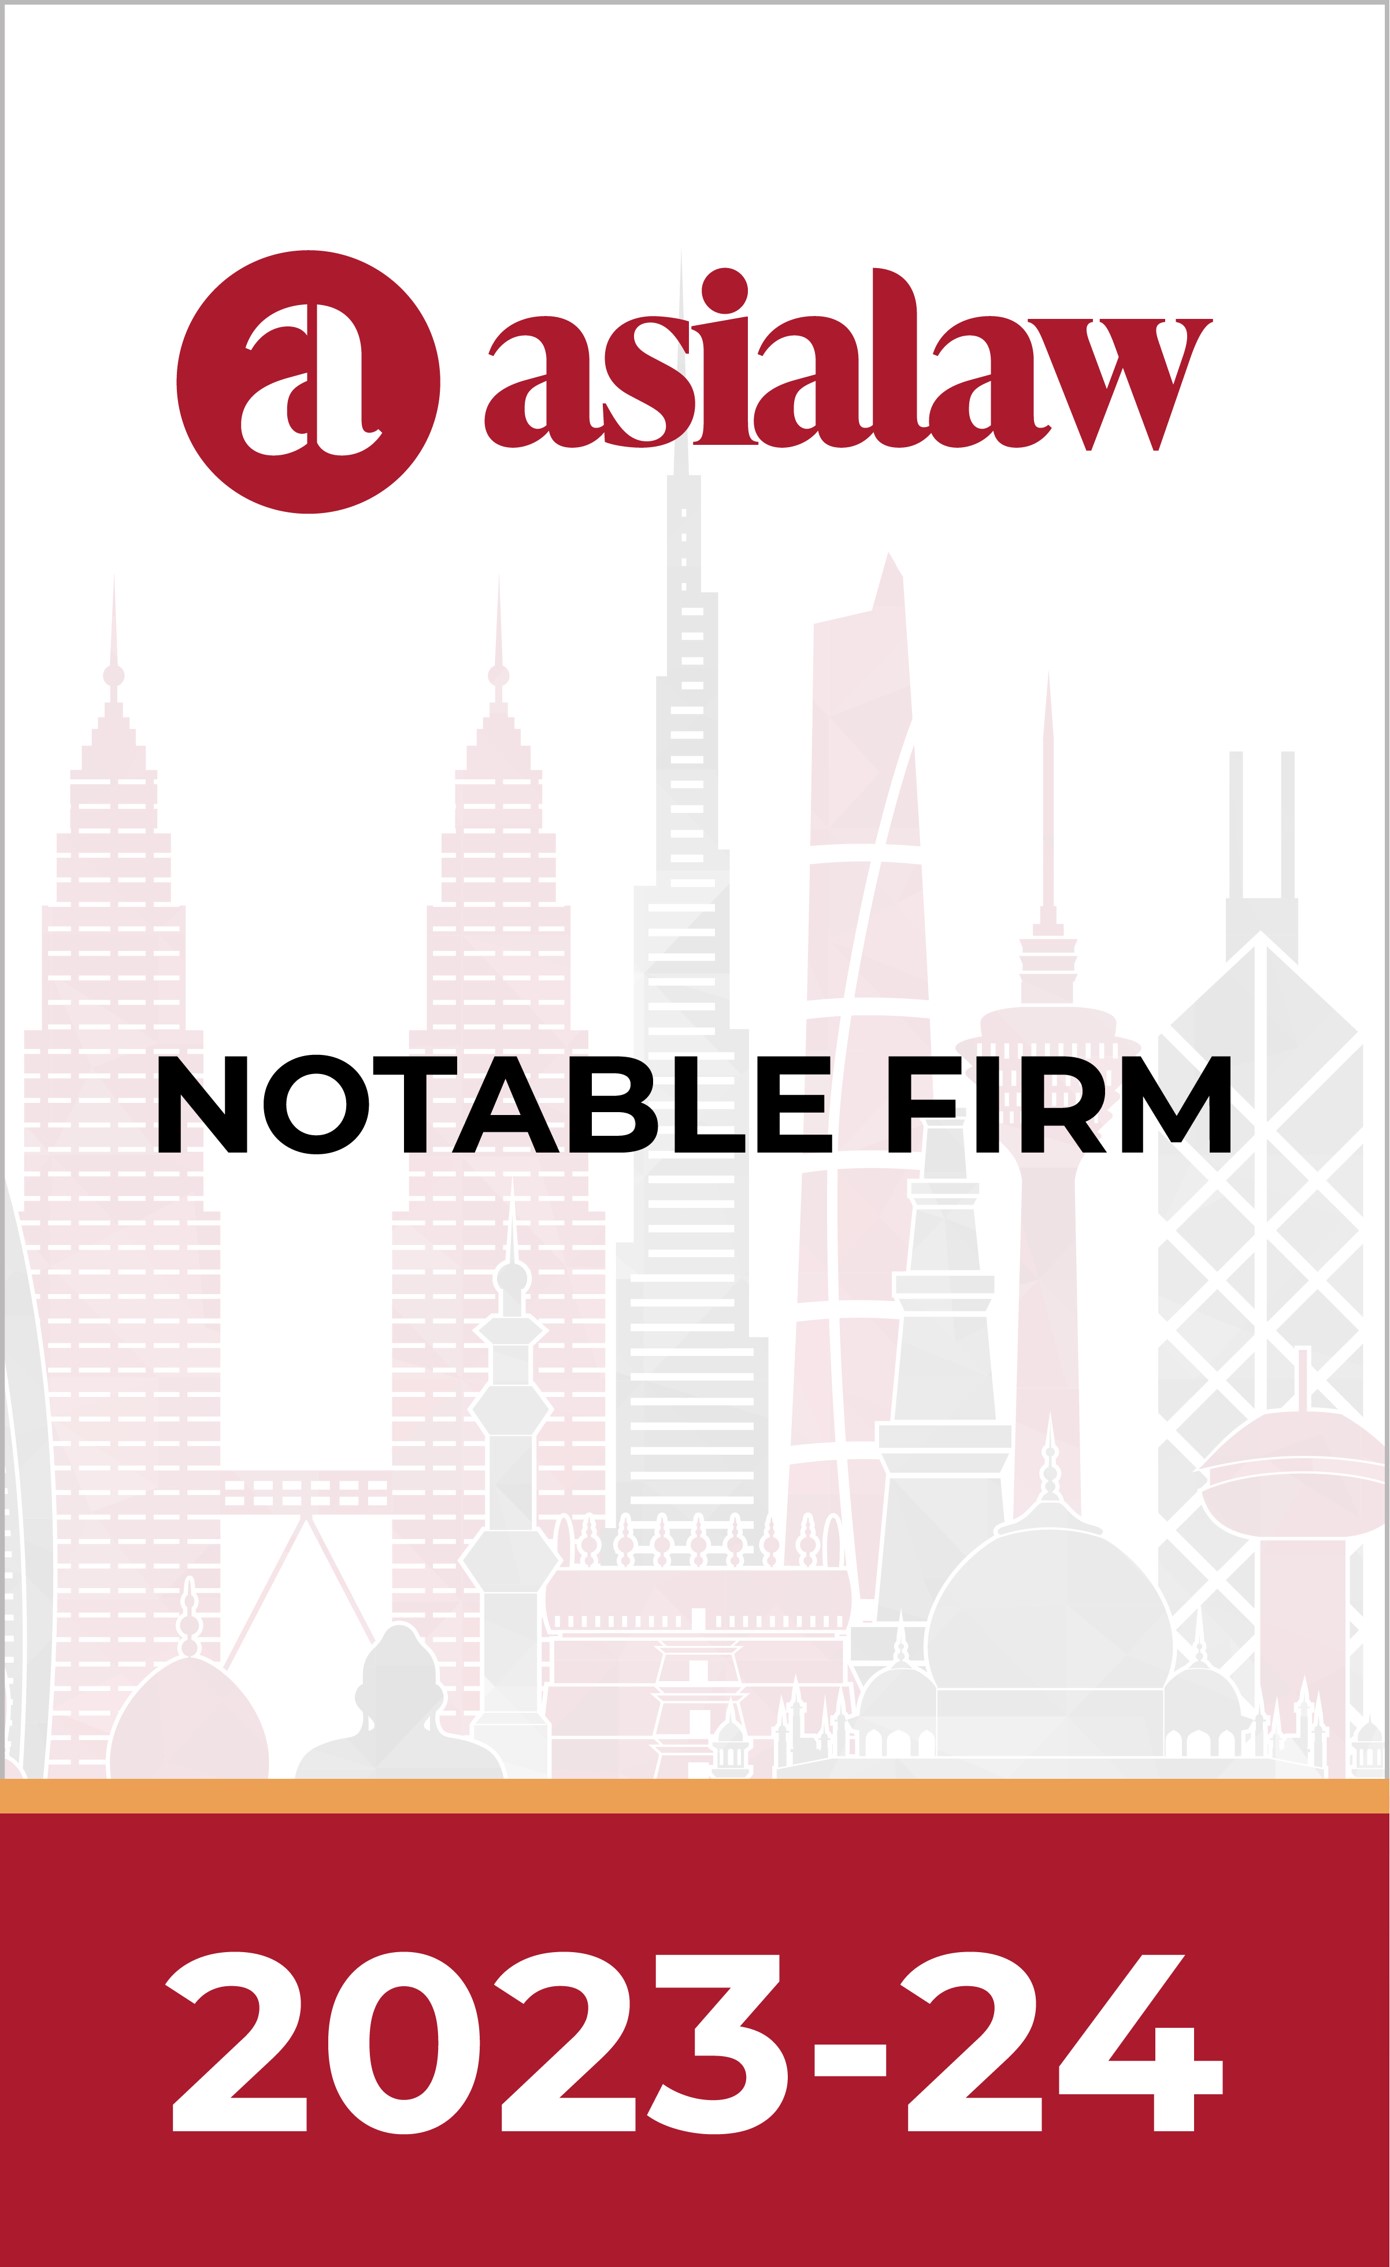 Recognised as a "Notable" Firm by asialaw 2023/24